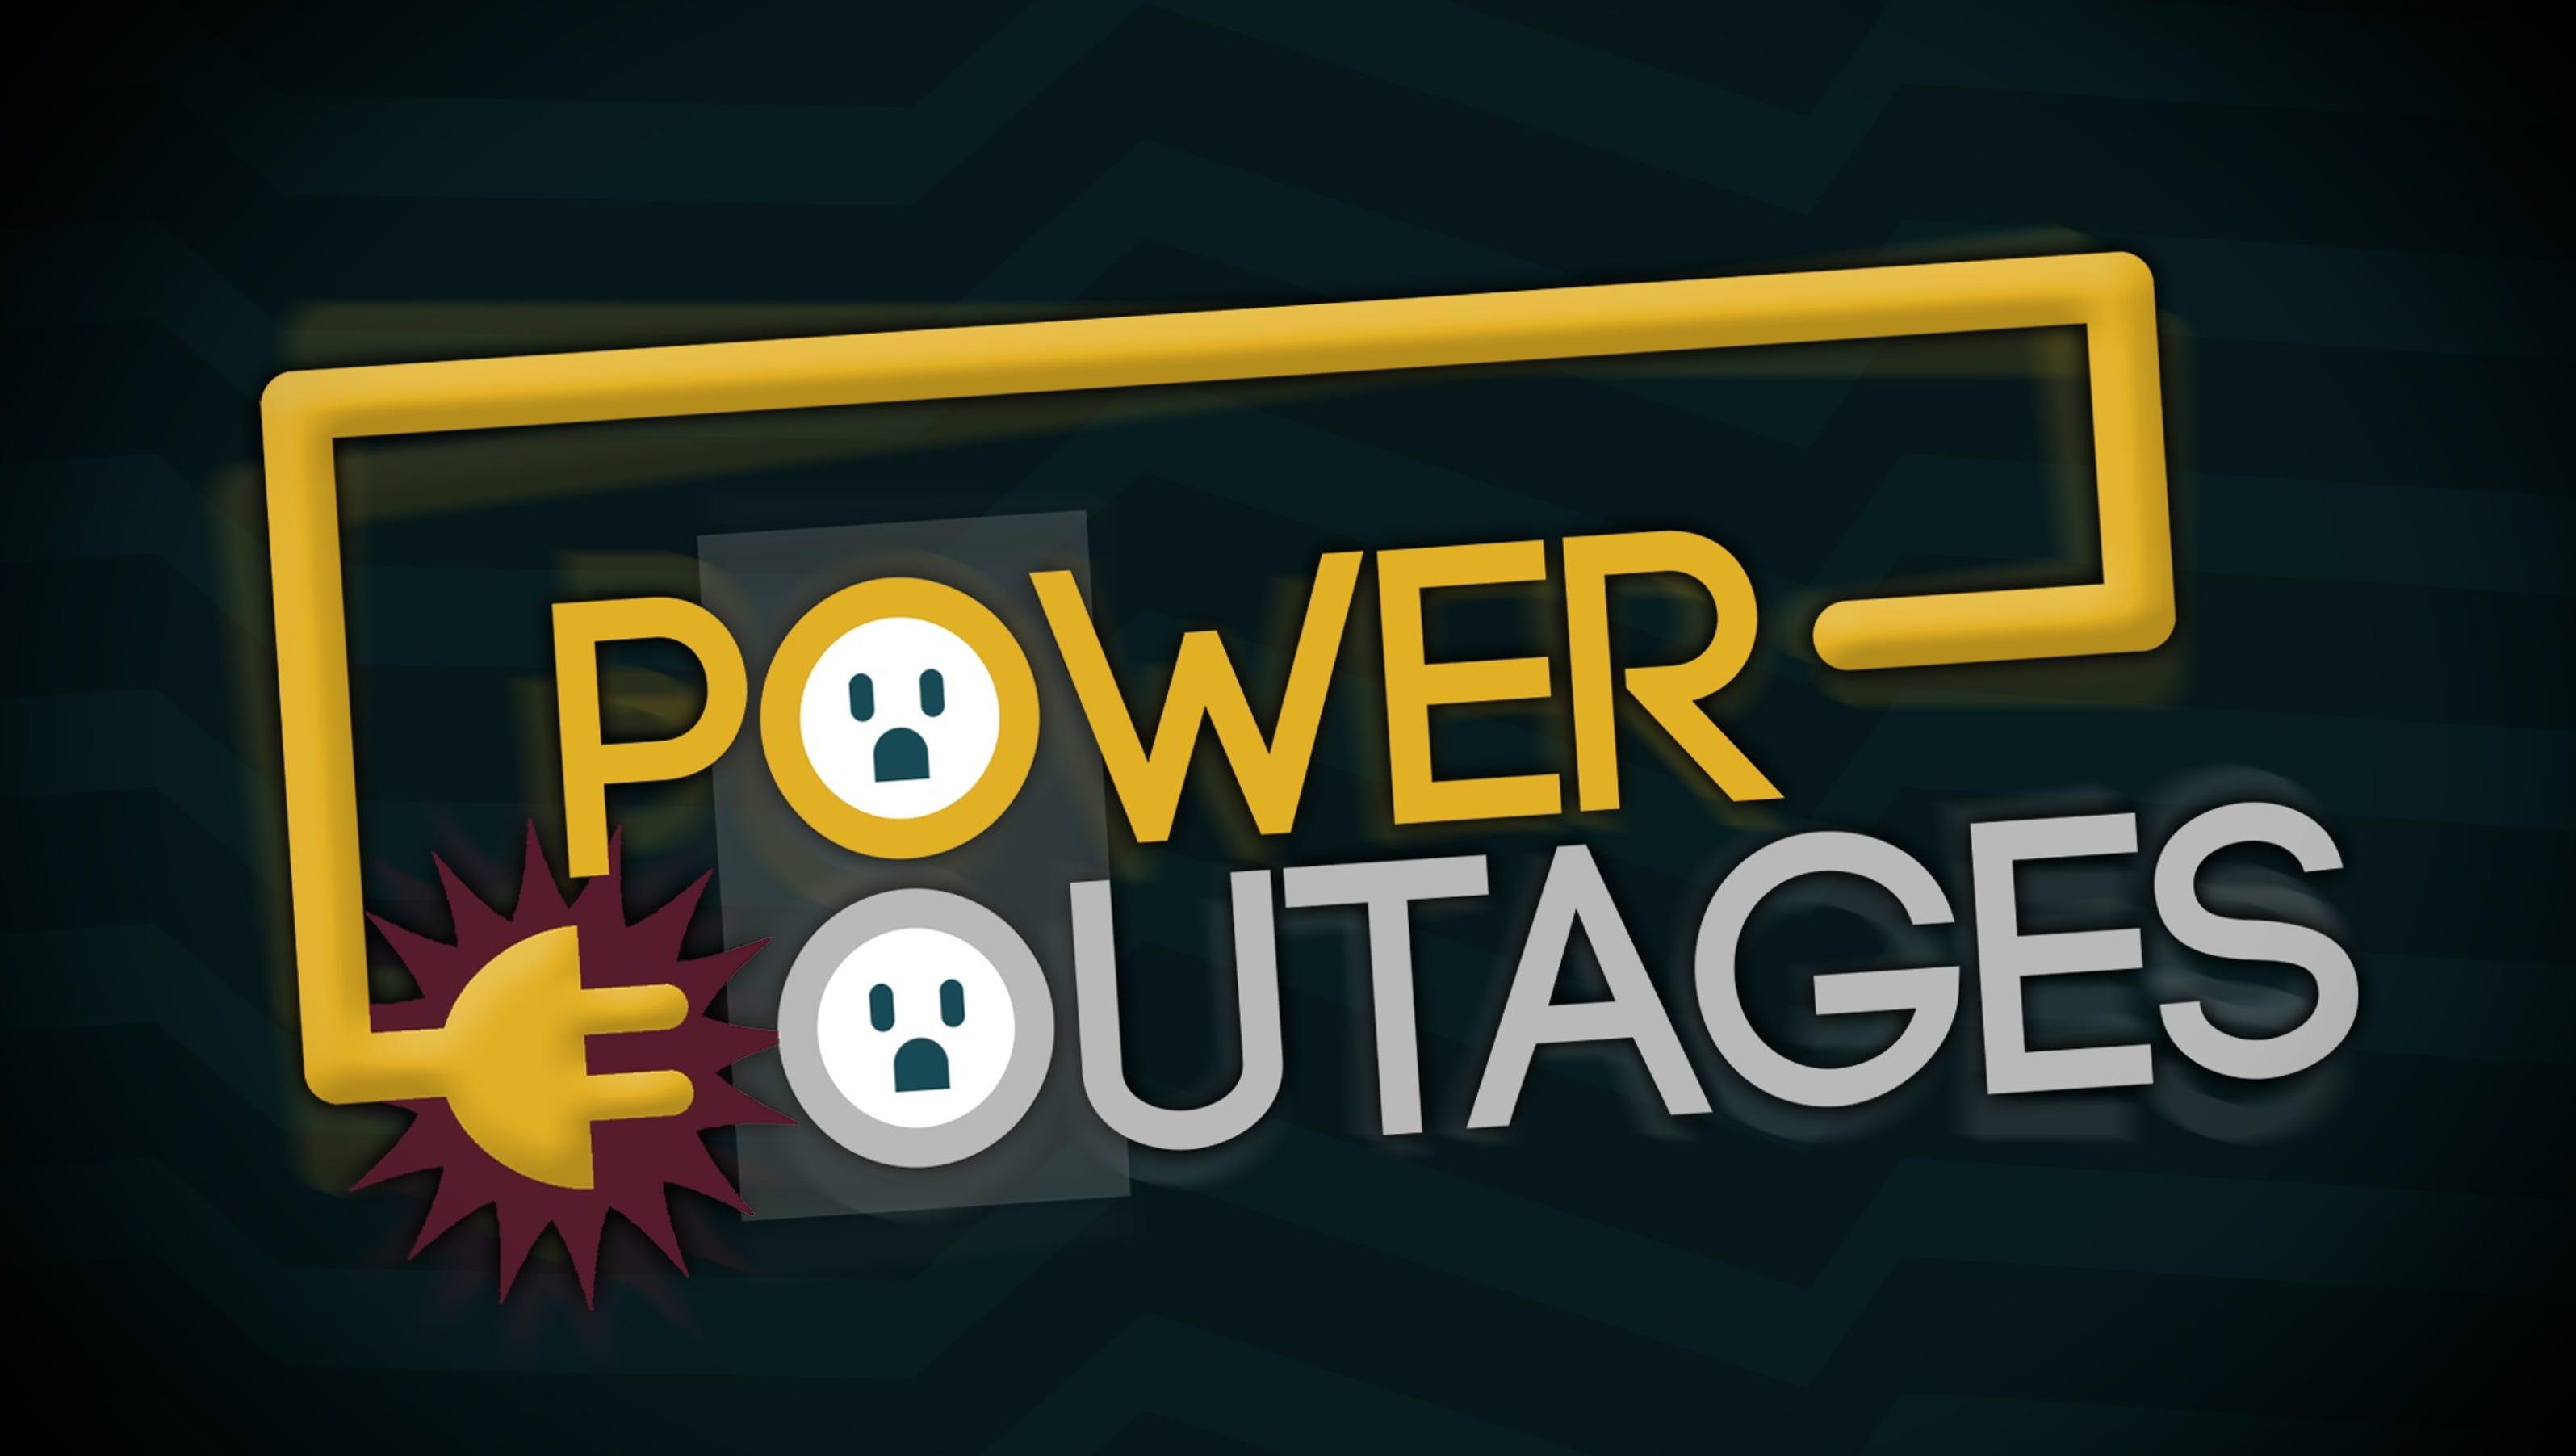 power outage clipart free - photo #29